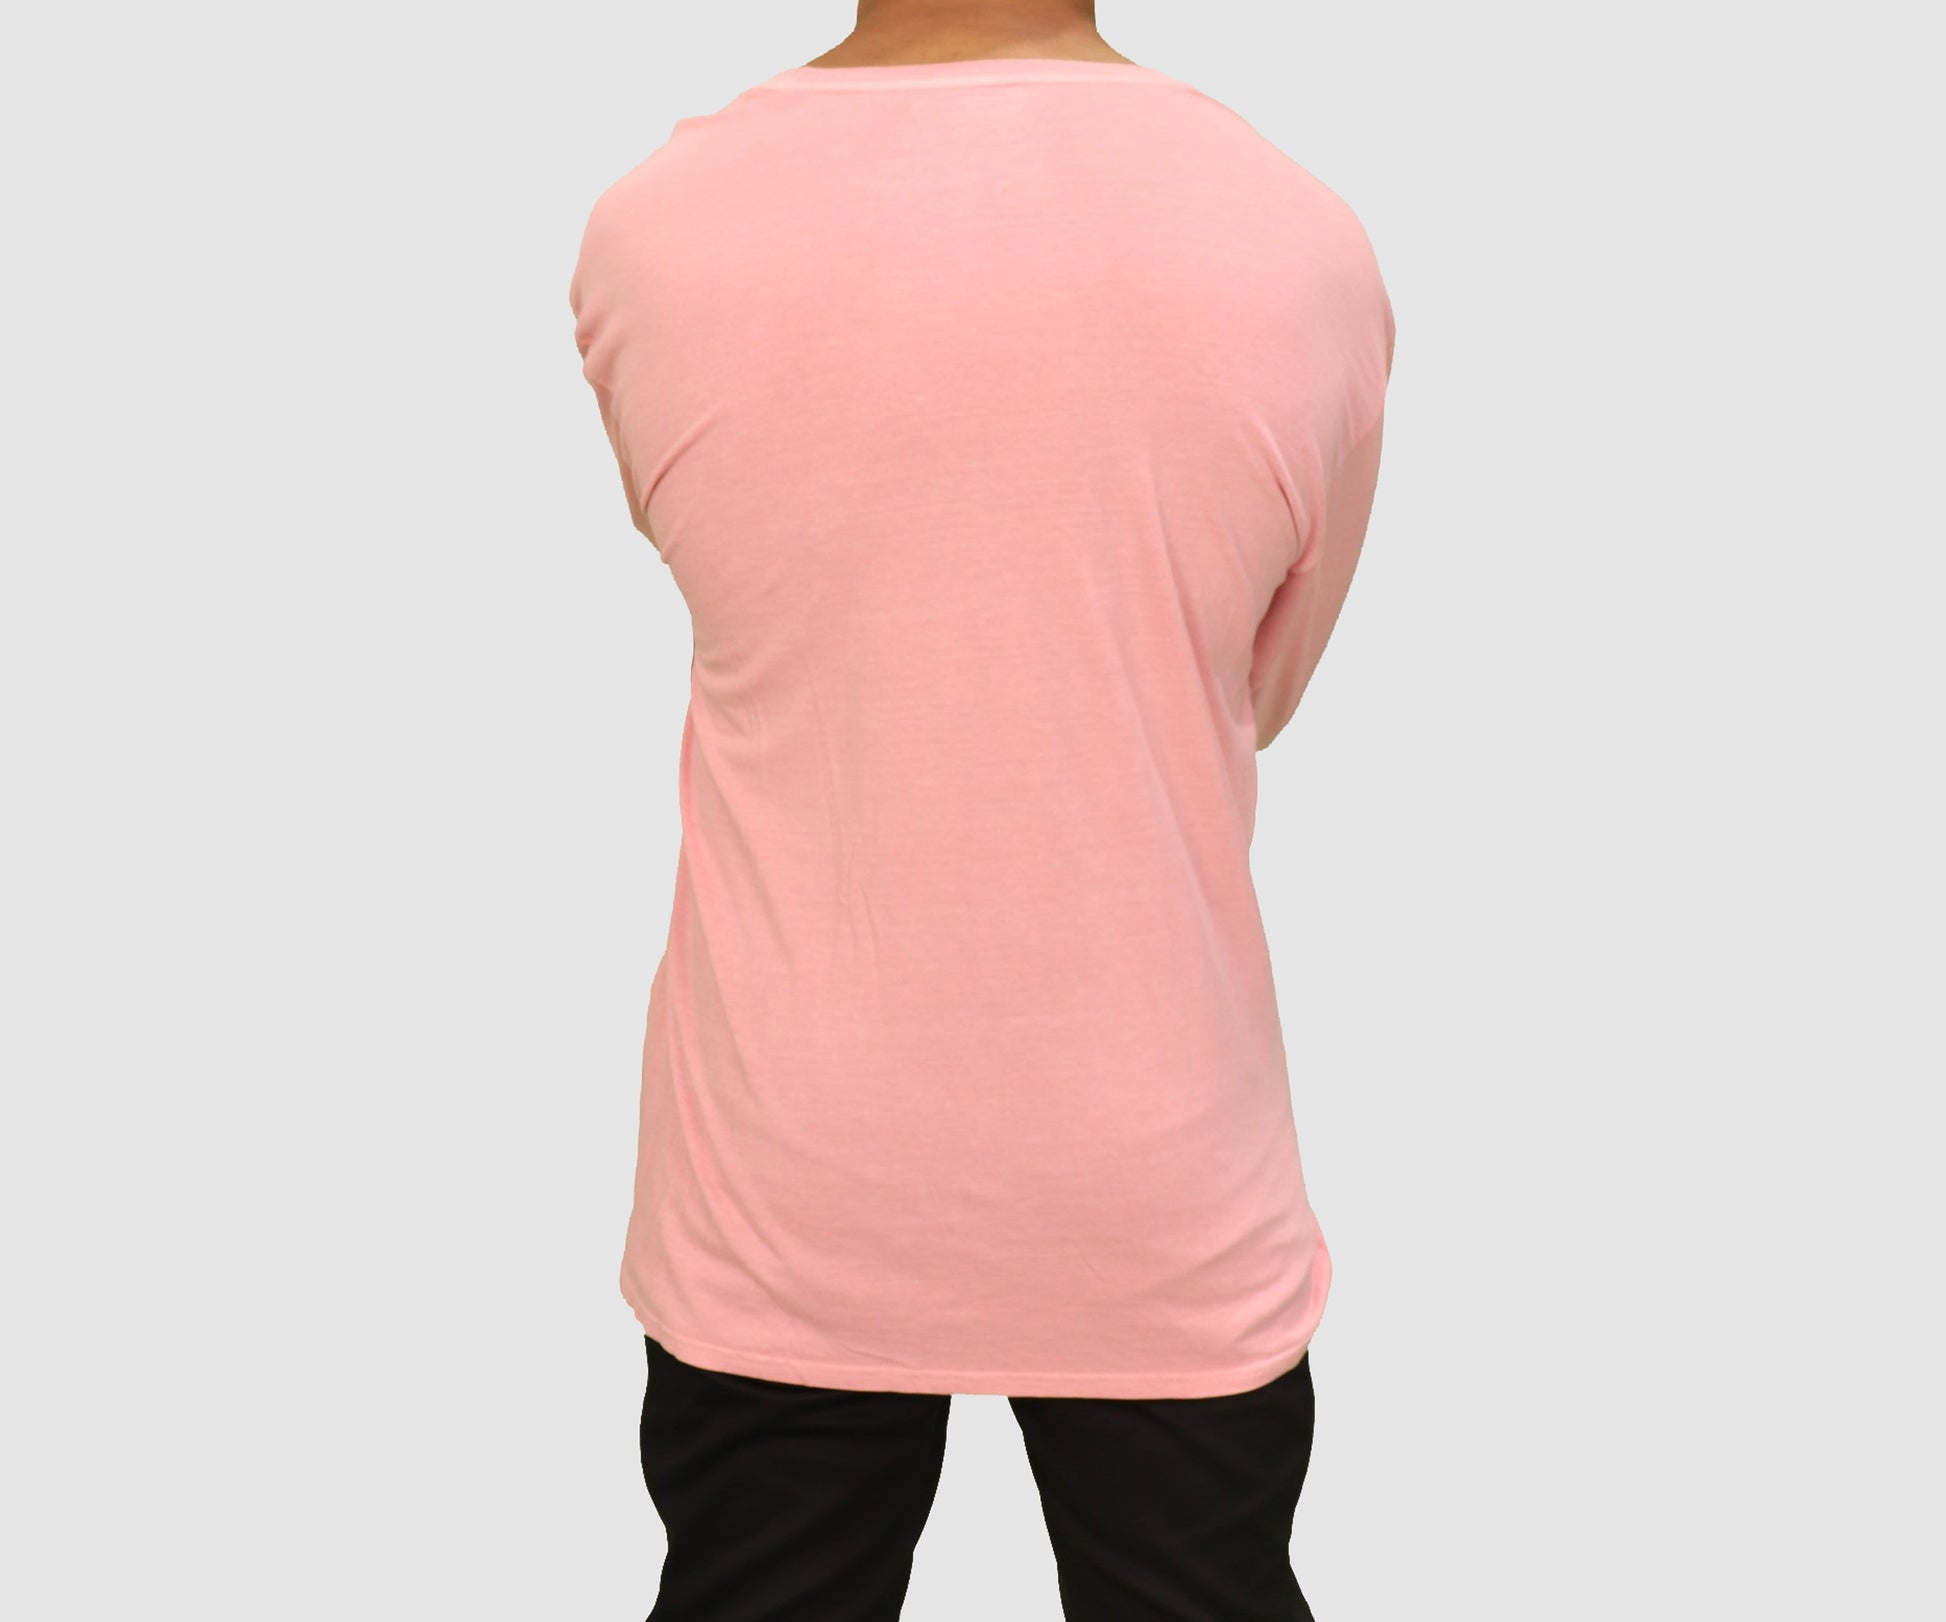 Pacsun Los Angeles Mens Tops Large / Pink Long Sleeve Top